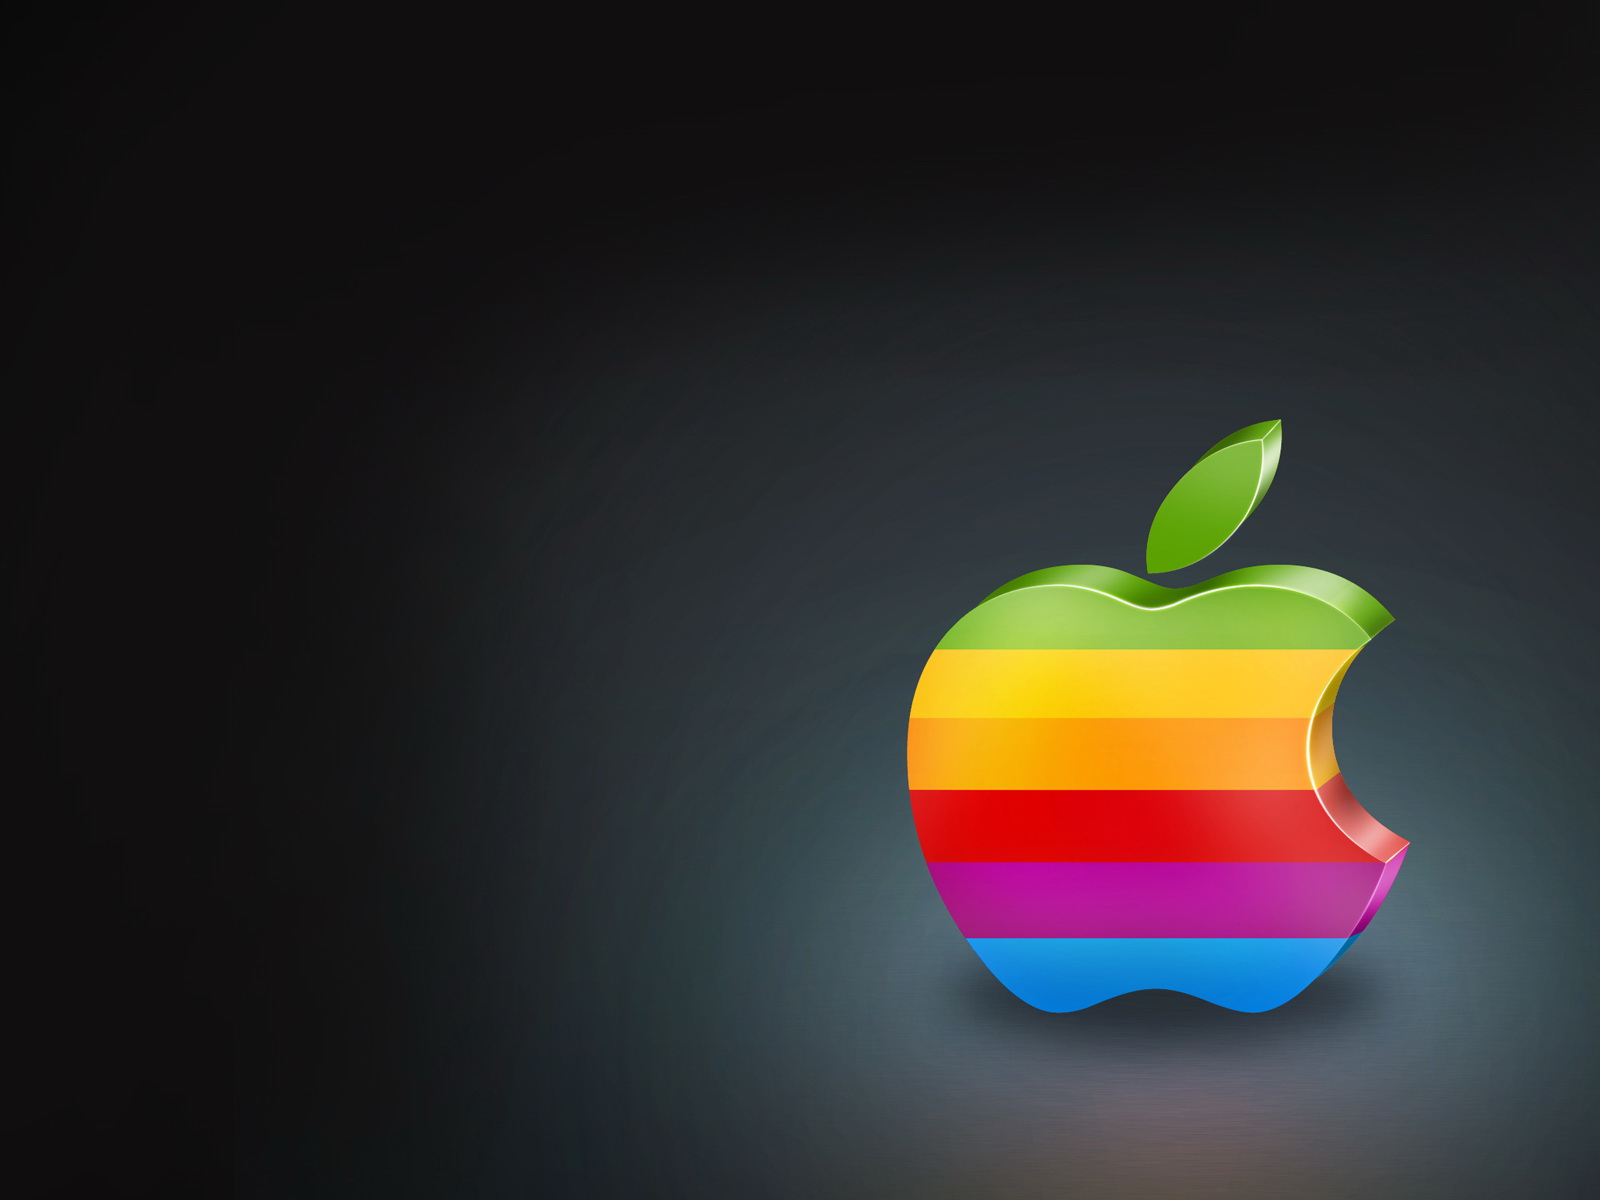 Colorful Apple Logo Wallpapers HD Wallpapers